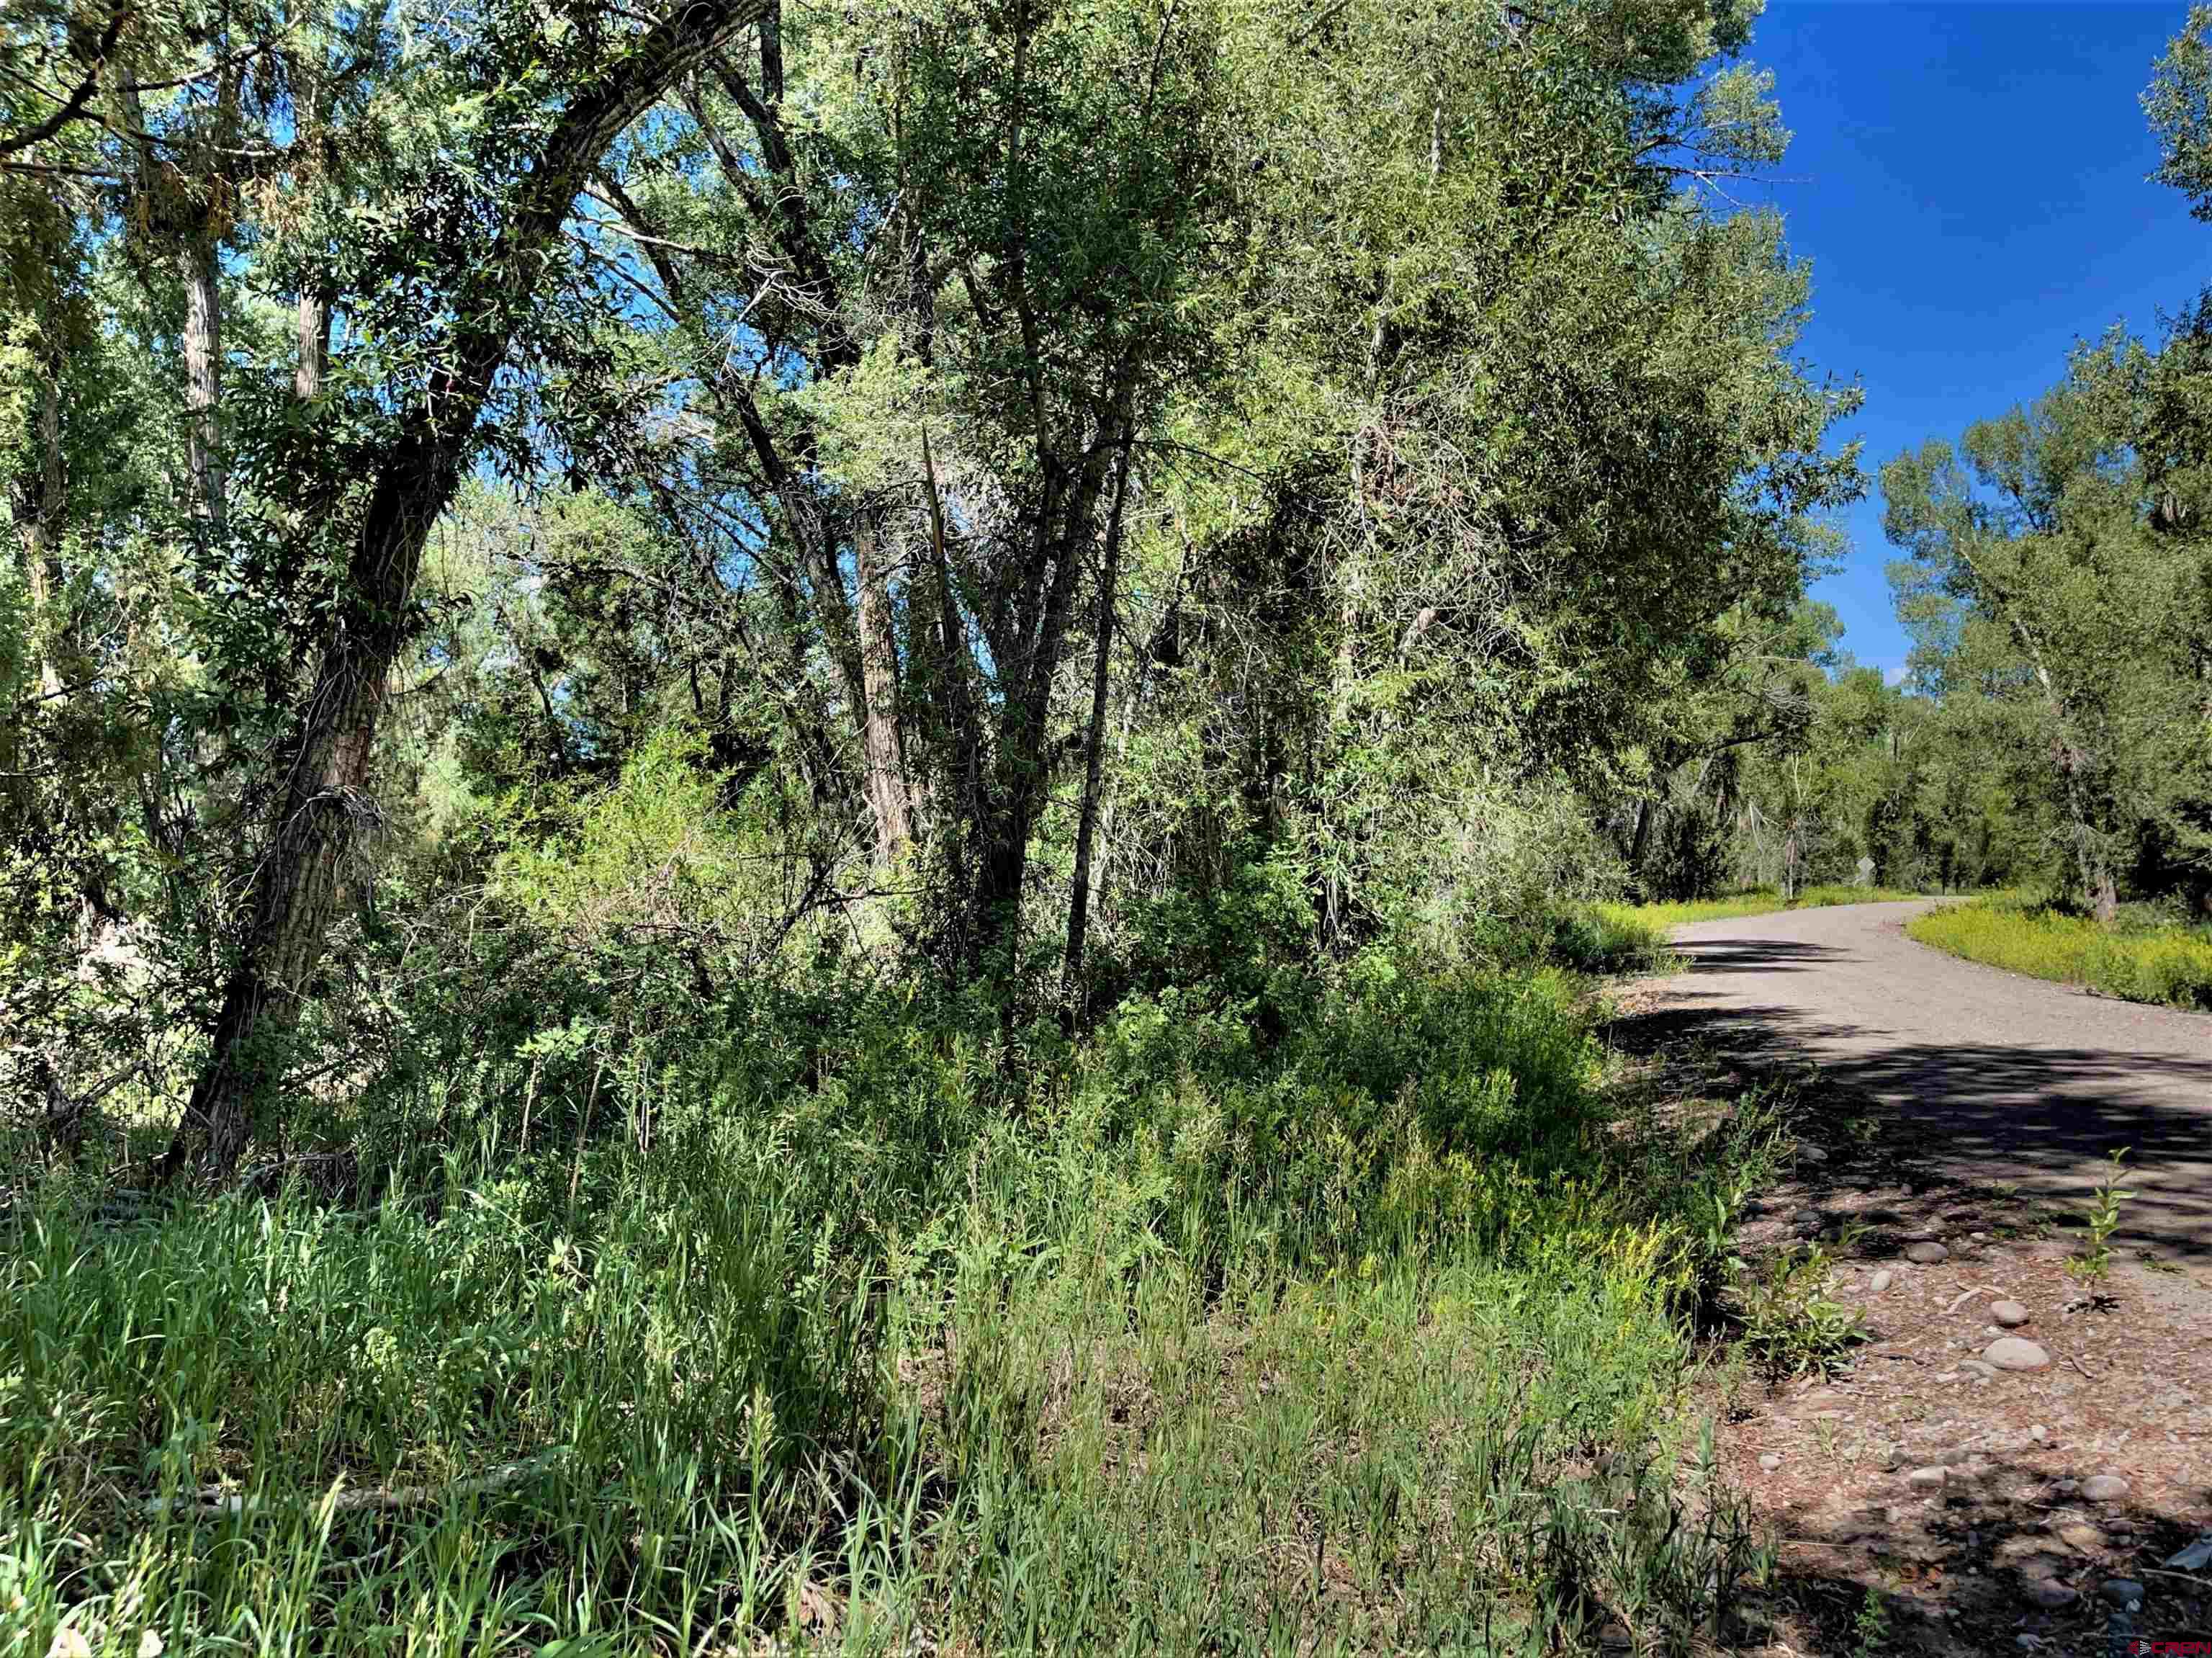 128, 136, 150 Ute Trail, South Fork, CO 81154 Listing Photo  1